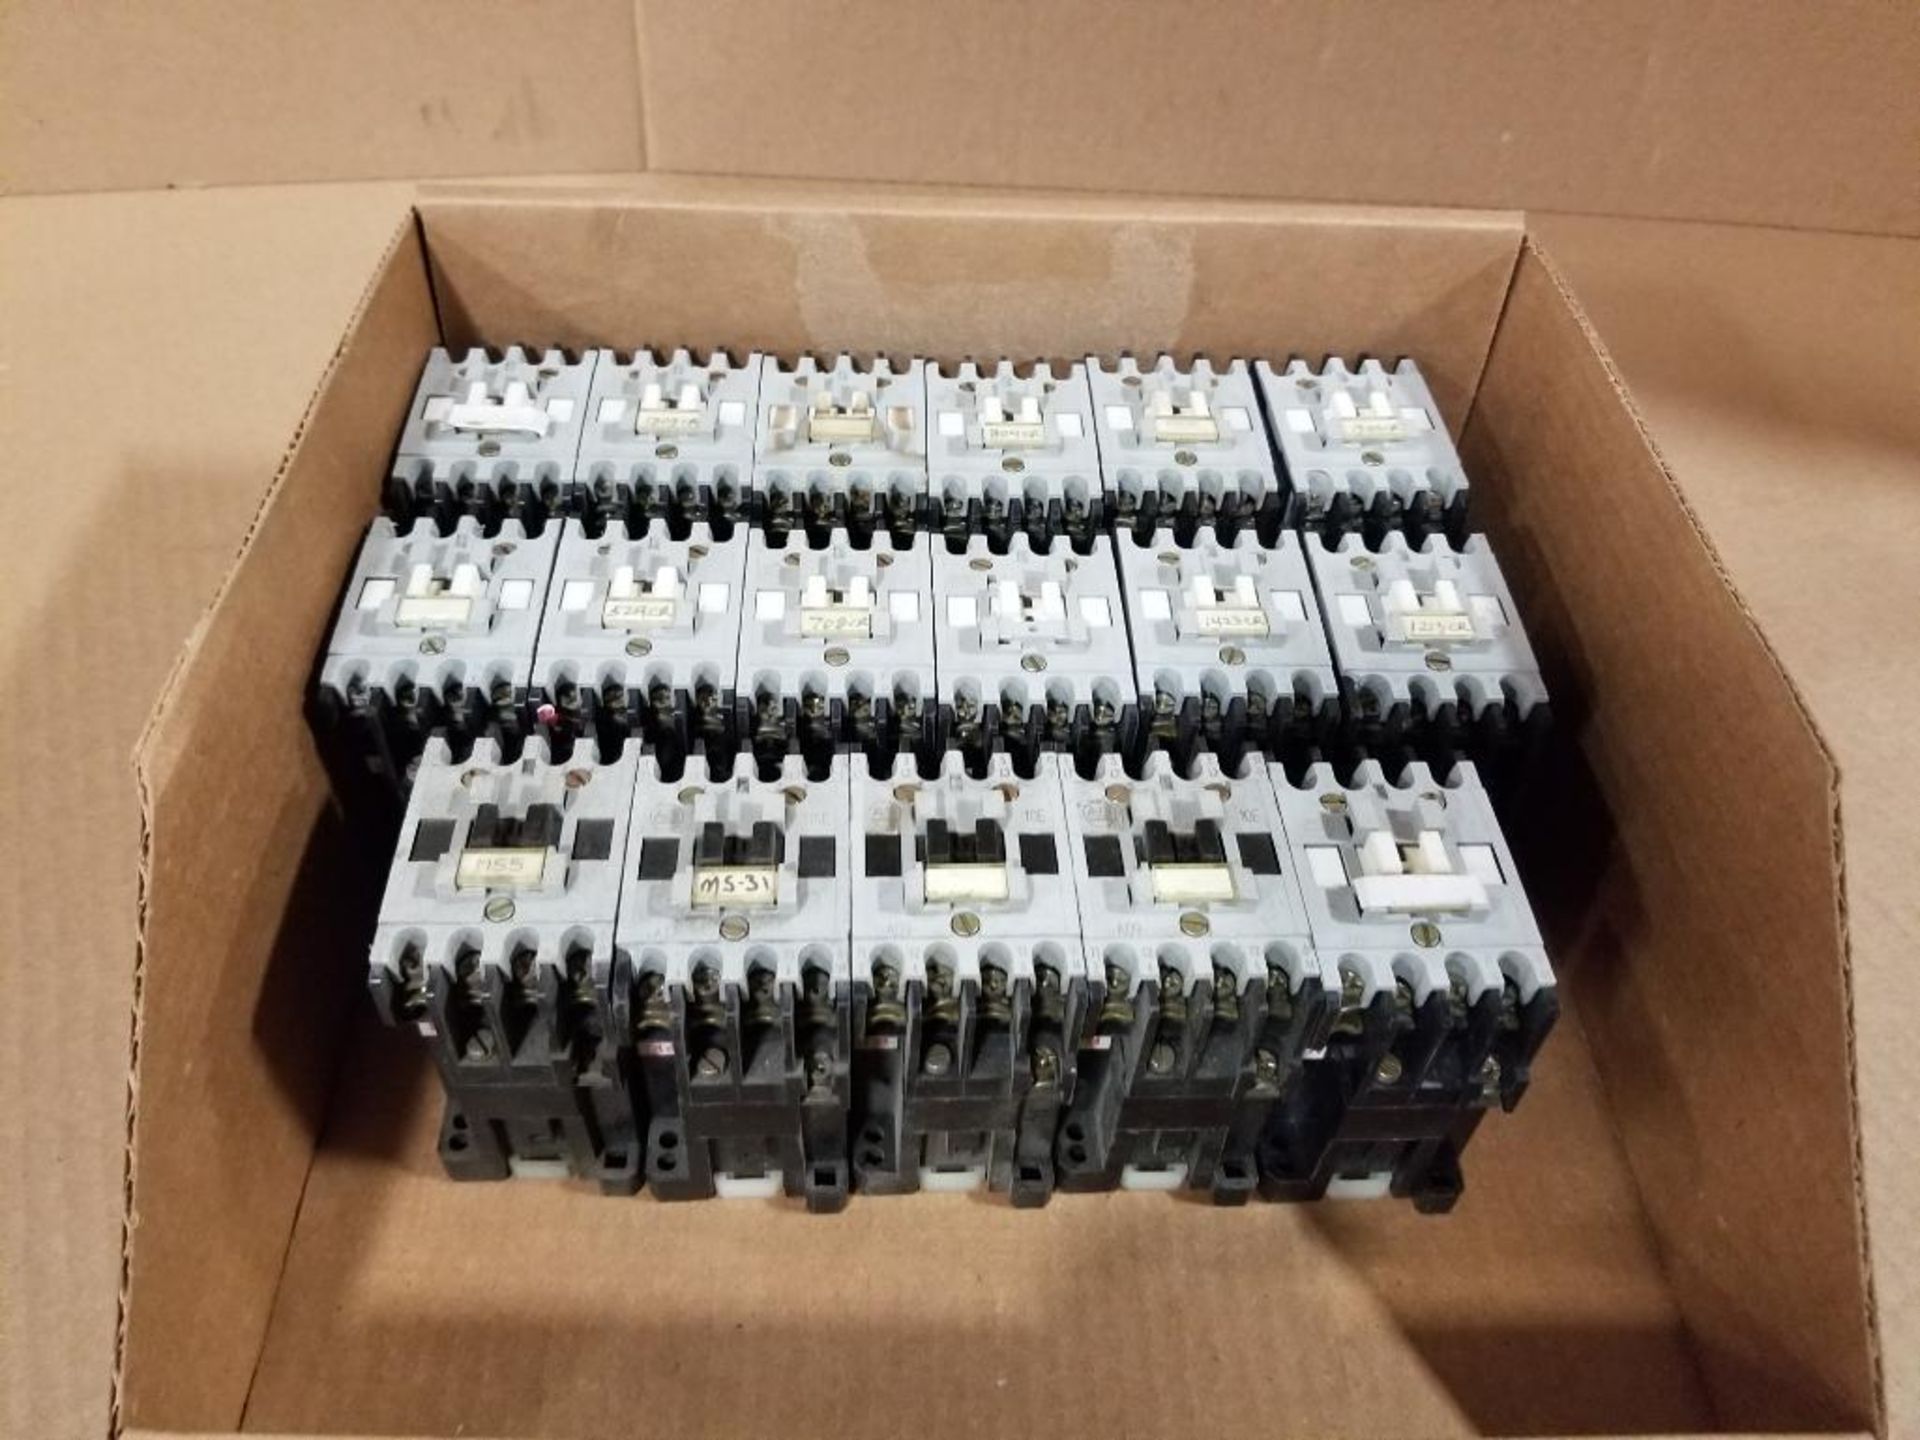 Qty 17 - Assorted electrical contactor. Allen Bradley.